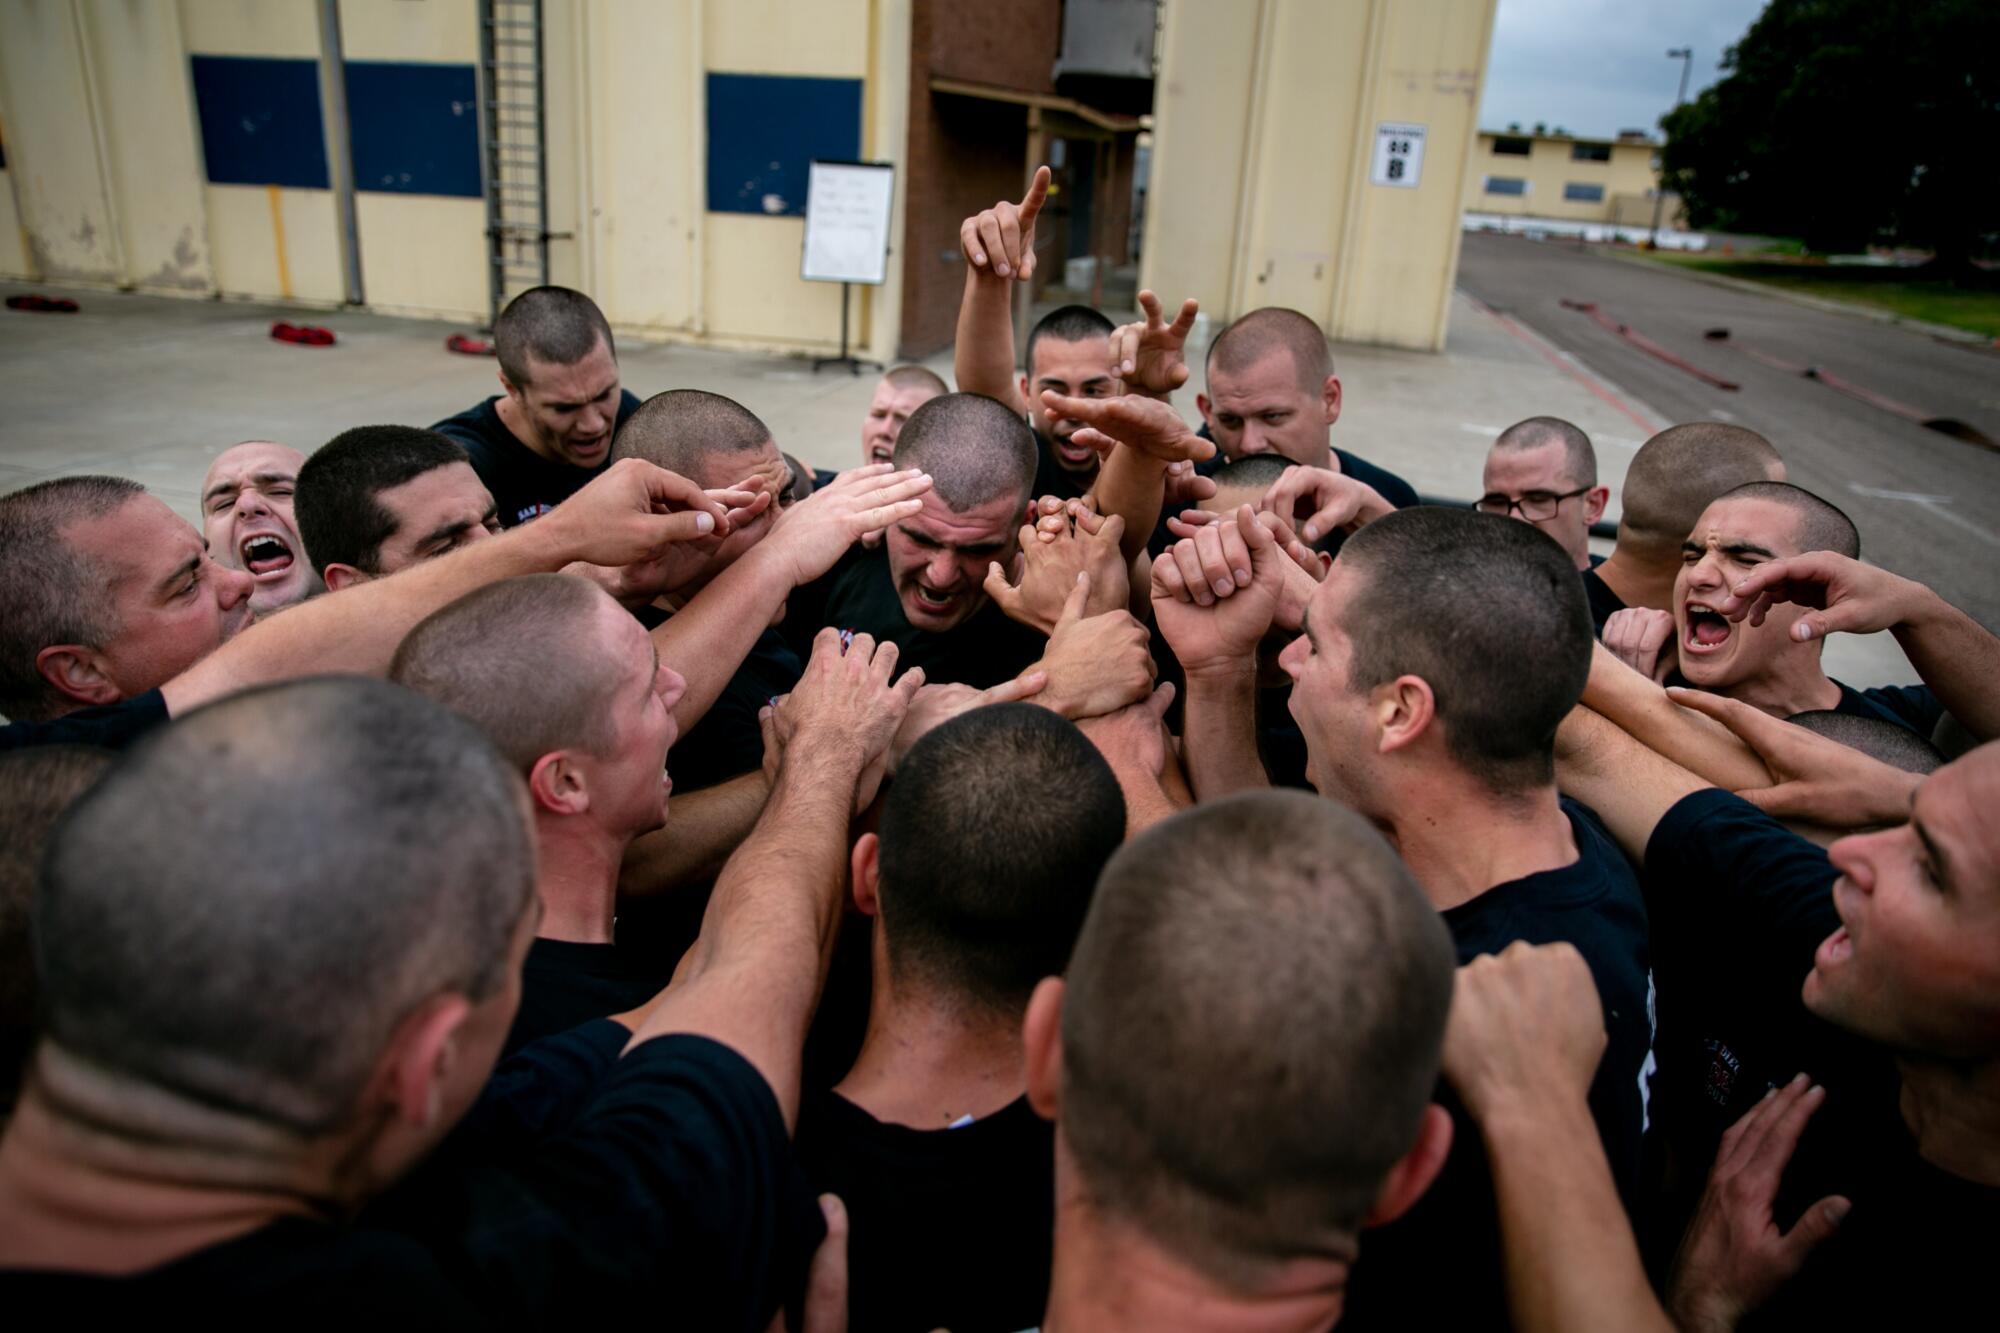 Recruits huddle together and chant "87! 87! 87!" after completing their morning exercise. Their instructor pointed out that they'd left one of their fellow recruits behind.